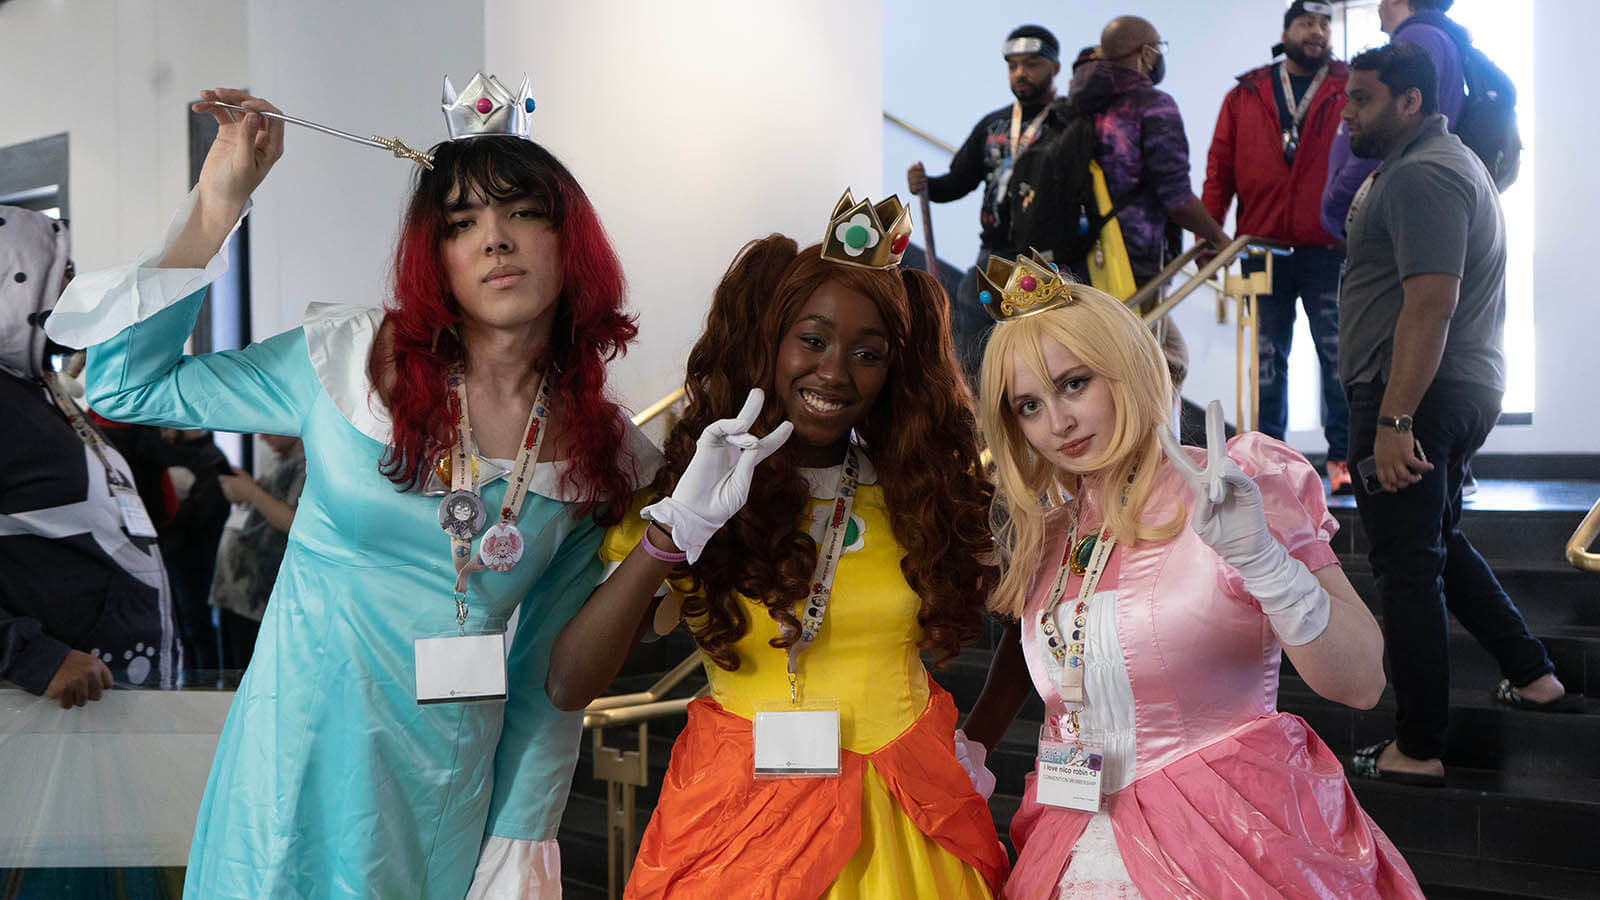 When it Comes to Costumes Attendees Go AllOut at Anime Boston